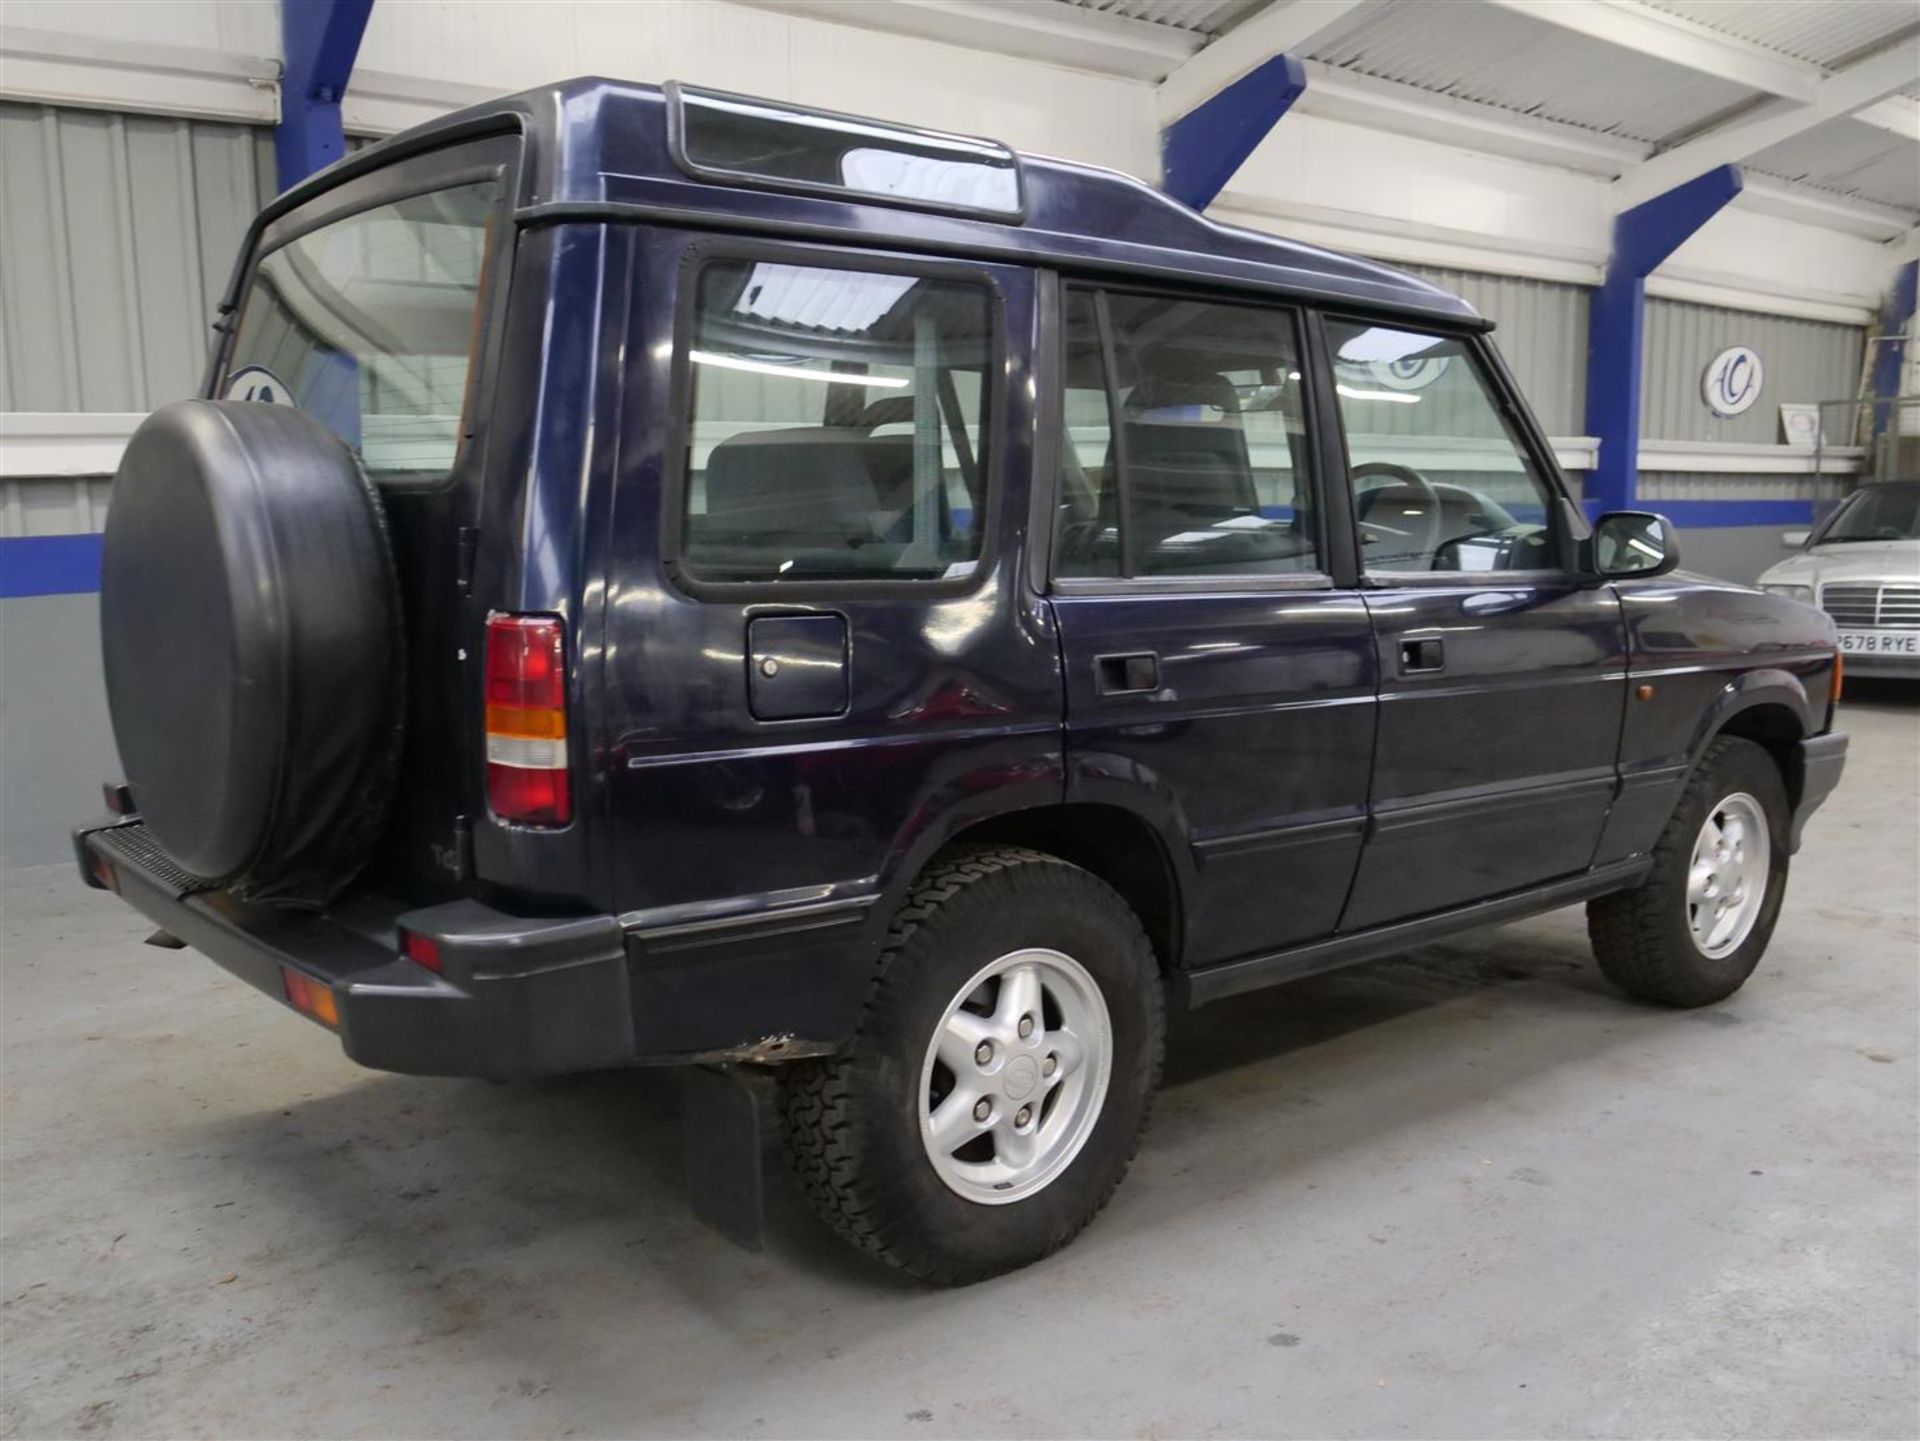 1996 Land Rover Discovery 2.5 TDI - Image 2 of 30